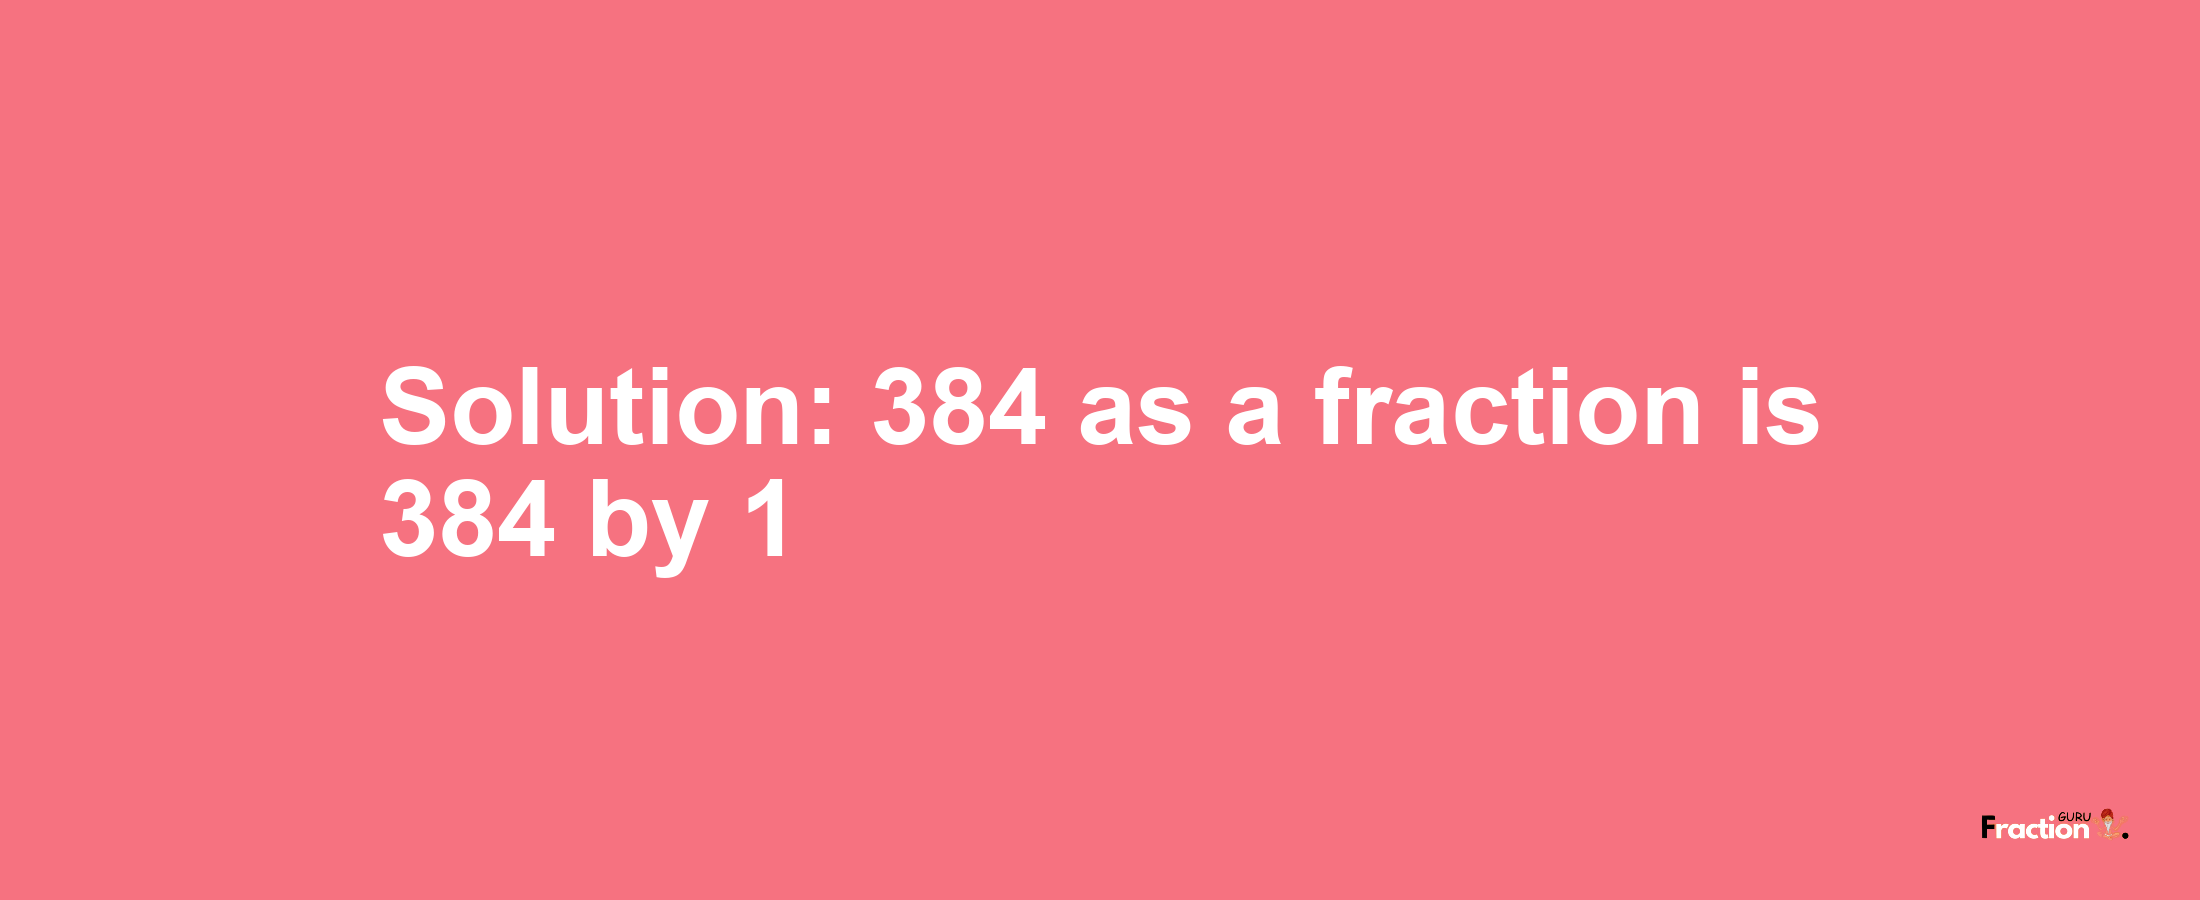 Solution:384 as a fraction is 384/1